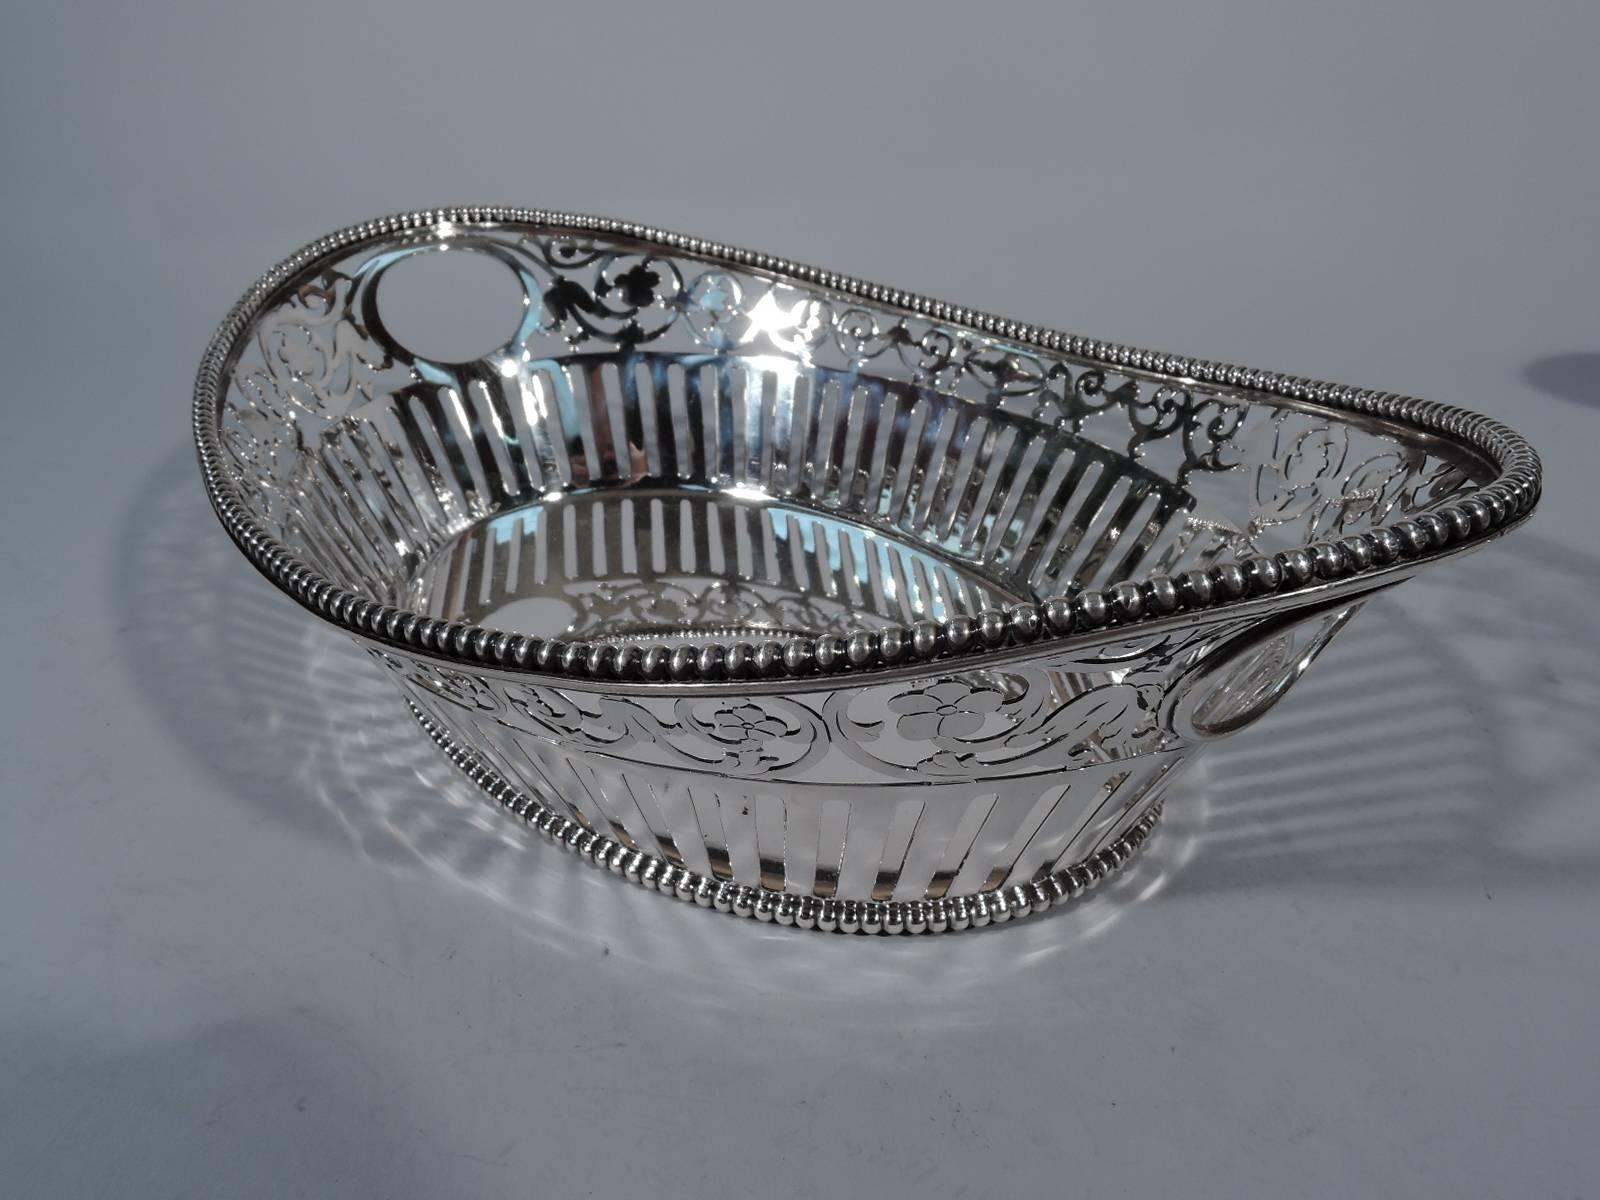 Sterling silver bread basket. Made by Howard & Co. in New York in 1889. Solid oval well with tapering sides and asymmetrical rim. Sides pierced with linear, floral, and rinceaux ornament. Oval cut-out end handles. Rim and base beaded. Elegant and